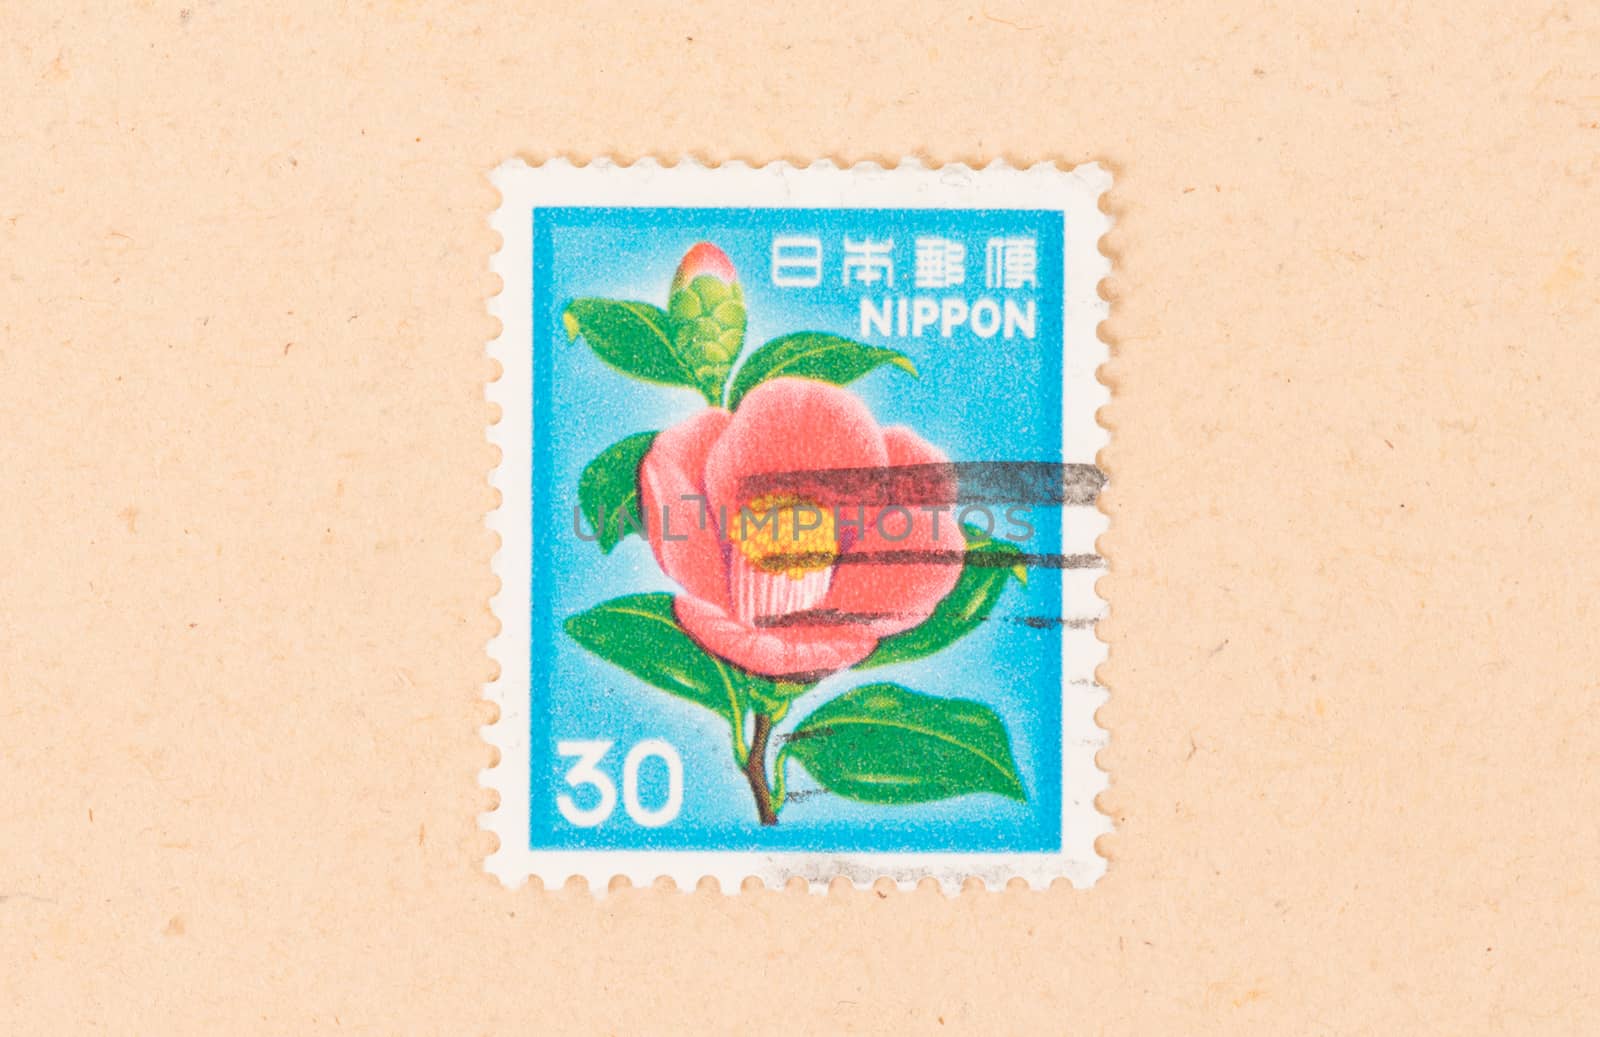 JAPAN - CIRCA 1980: A stamp printed in Japan shows a flower, cir by michaklootwijk